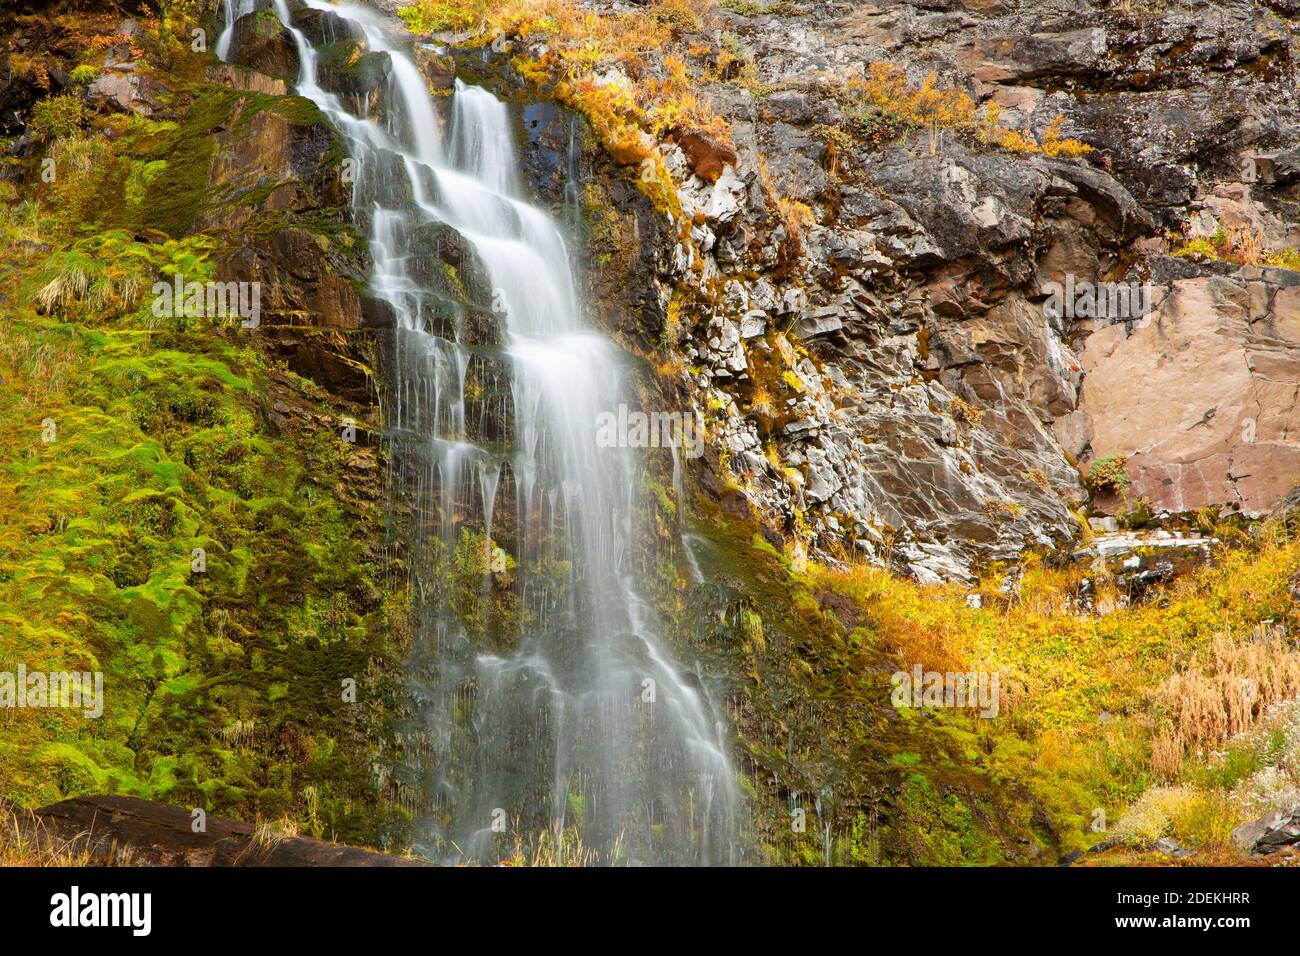 Cascate Plaikni, Crater Lake National Park, Volcano Legacy National Scenic Byway, Oregon Foto Stock